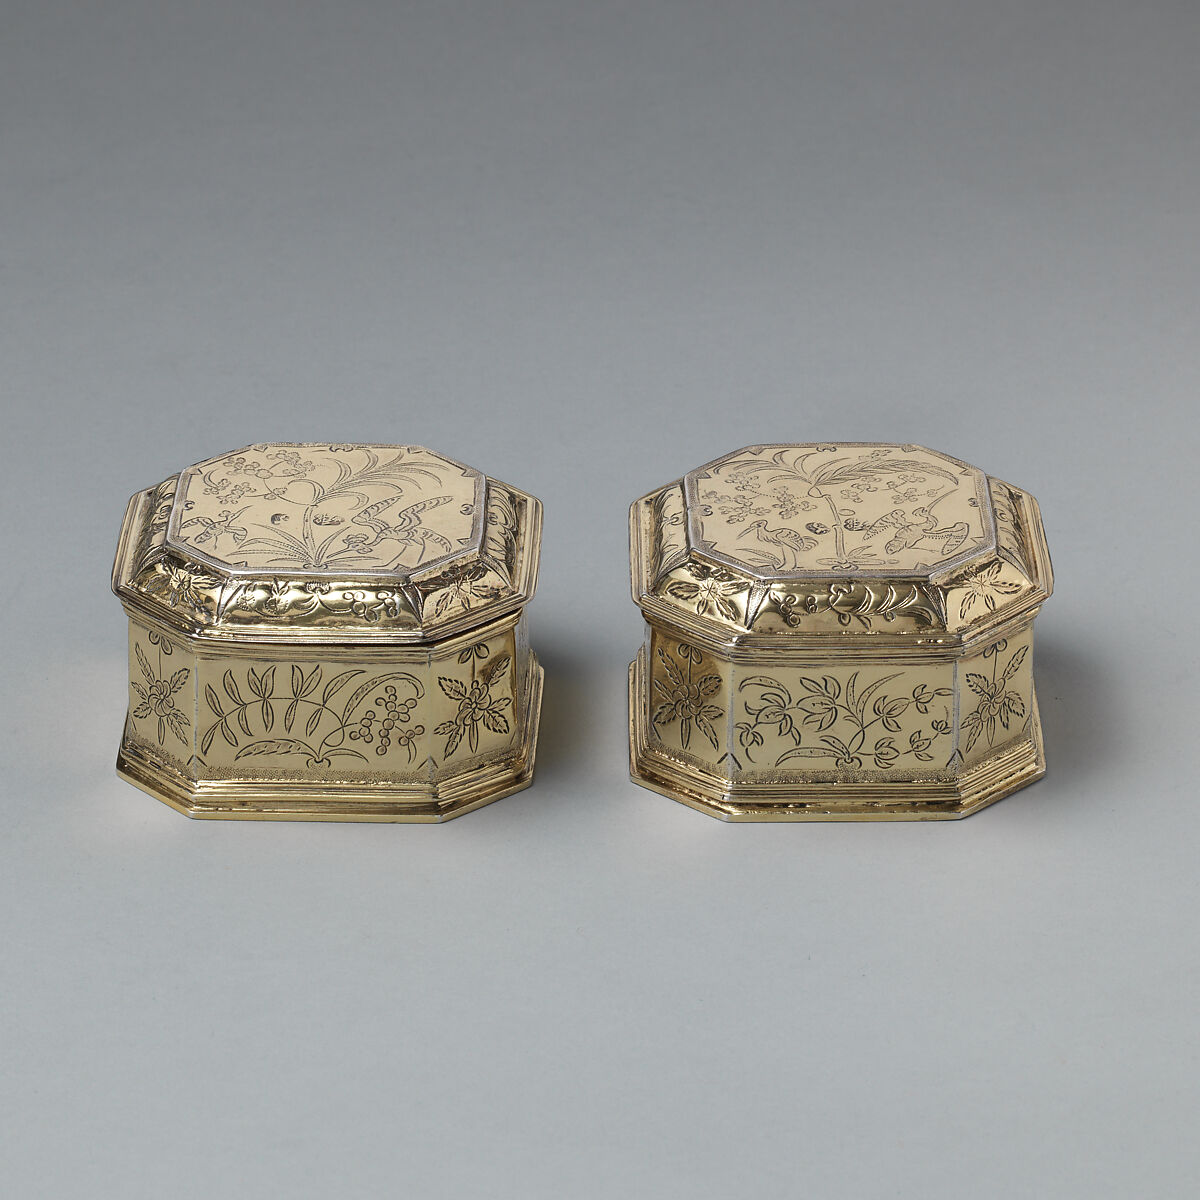 Pair of boxes with covers (part of a toilet service), William Fowle, Silver gilt, British, London